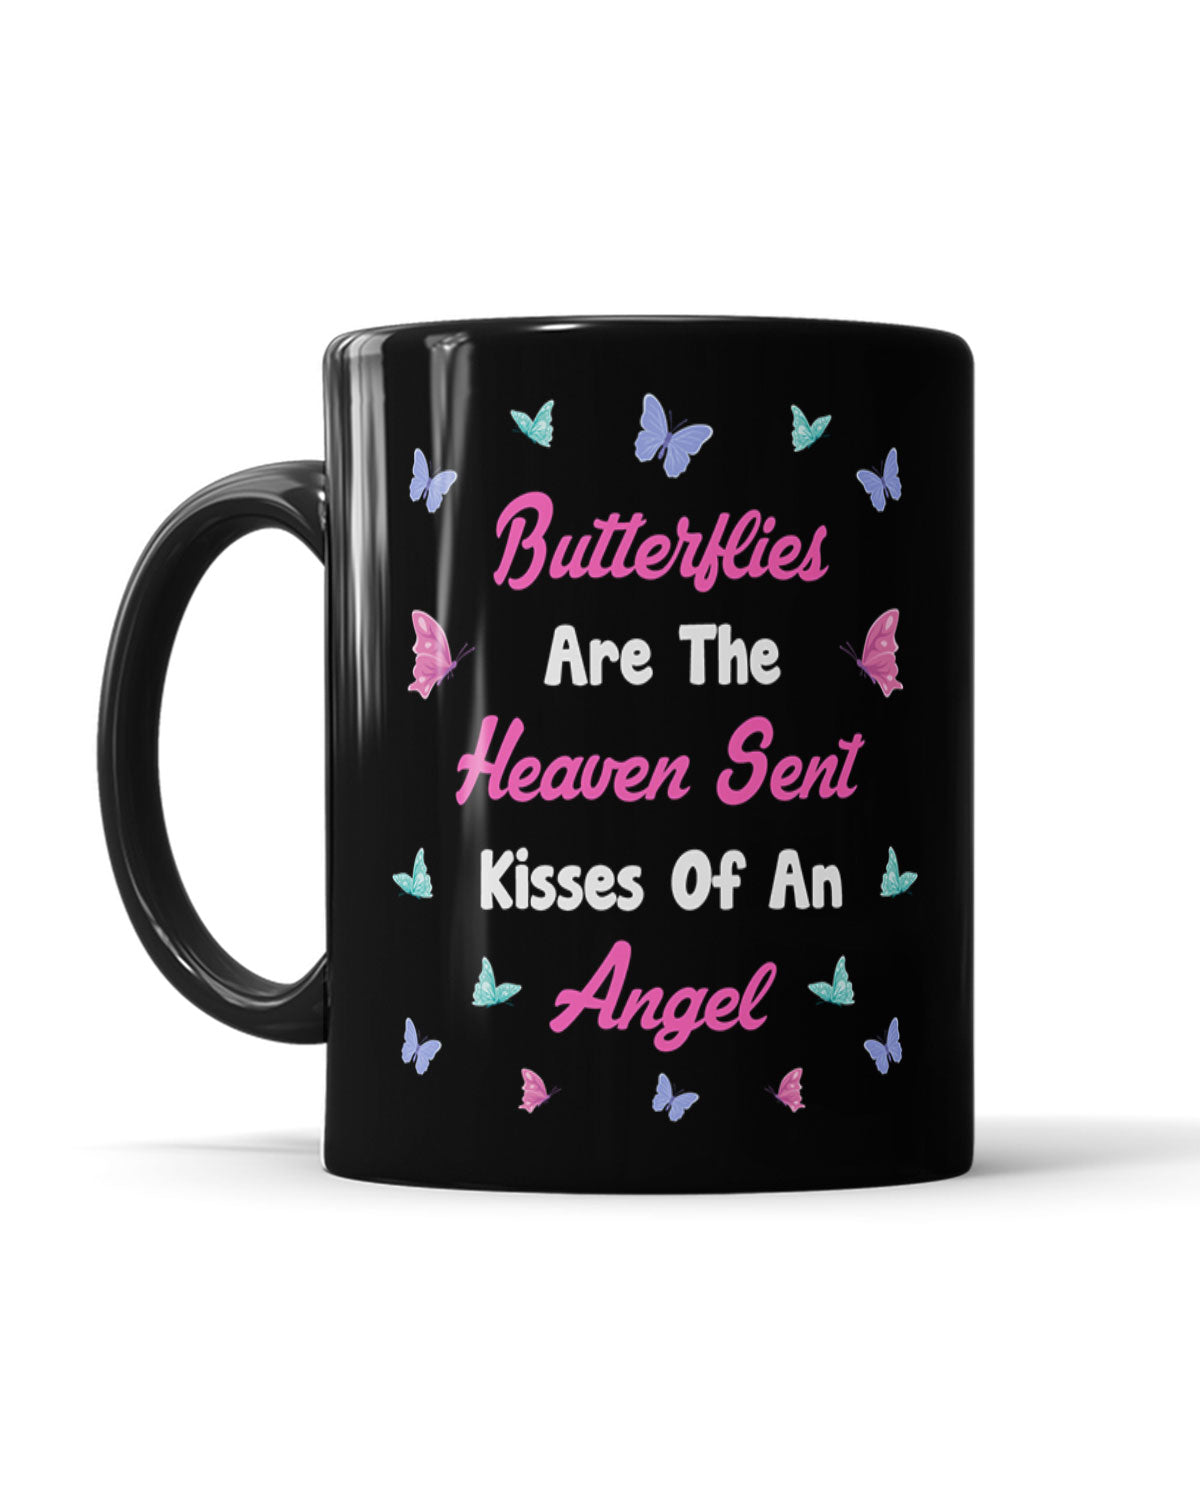 Butterflies Are The Heaven Sent Kisses Of An Angel